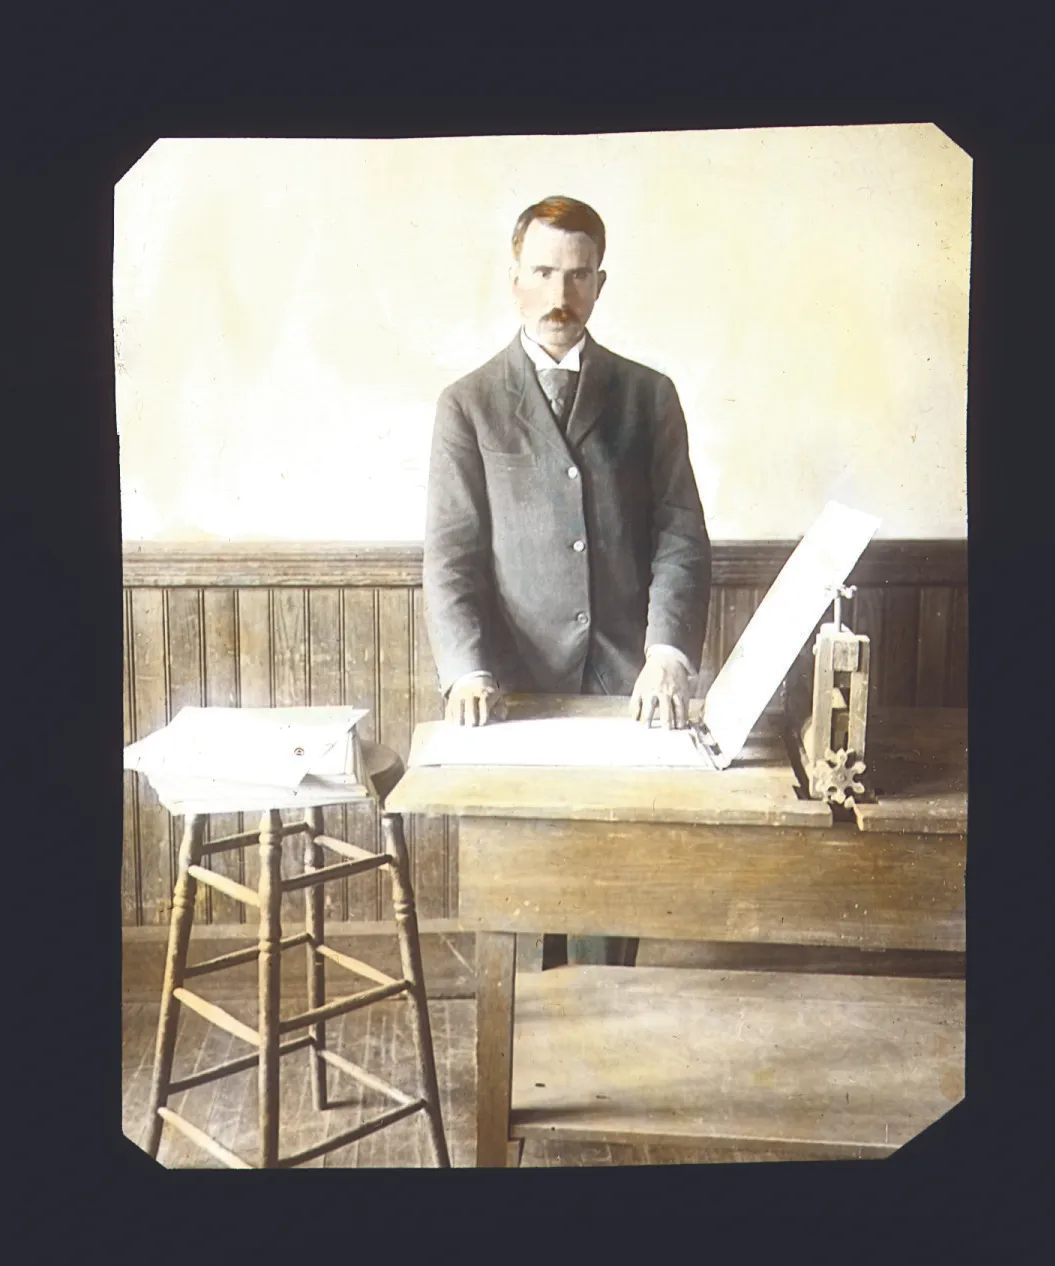 Legally blind Austin O. Wilson makes first braille magazine on a device he invented, circa 1899